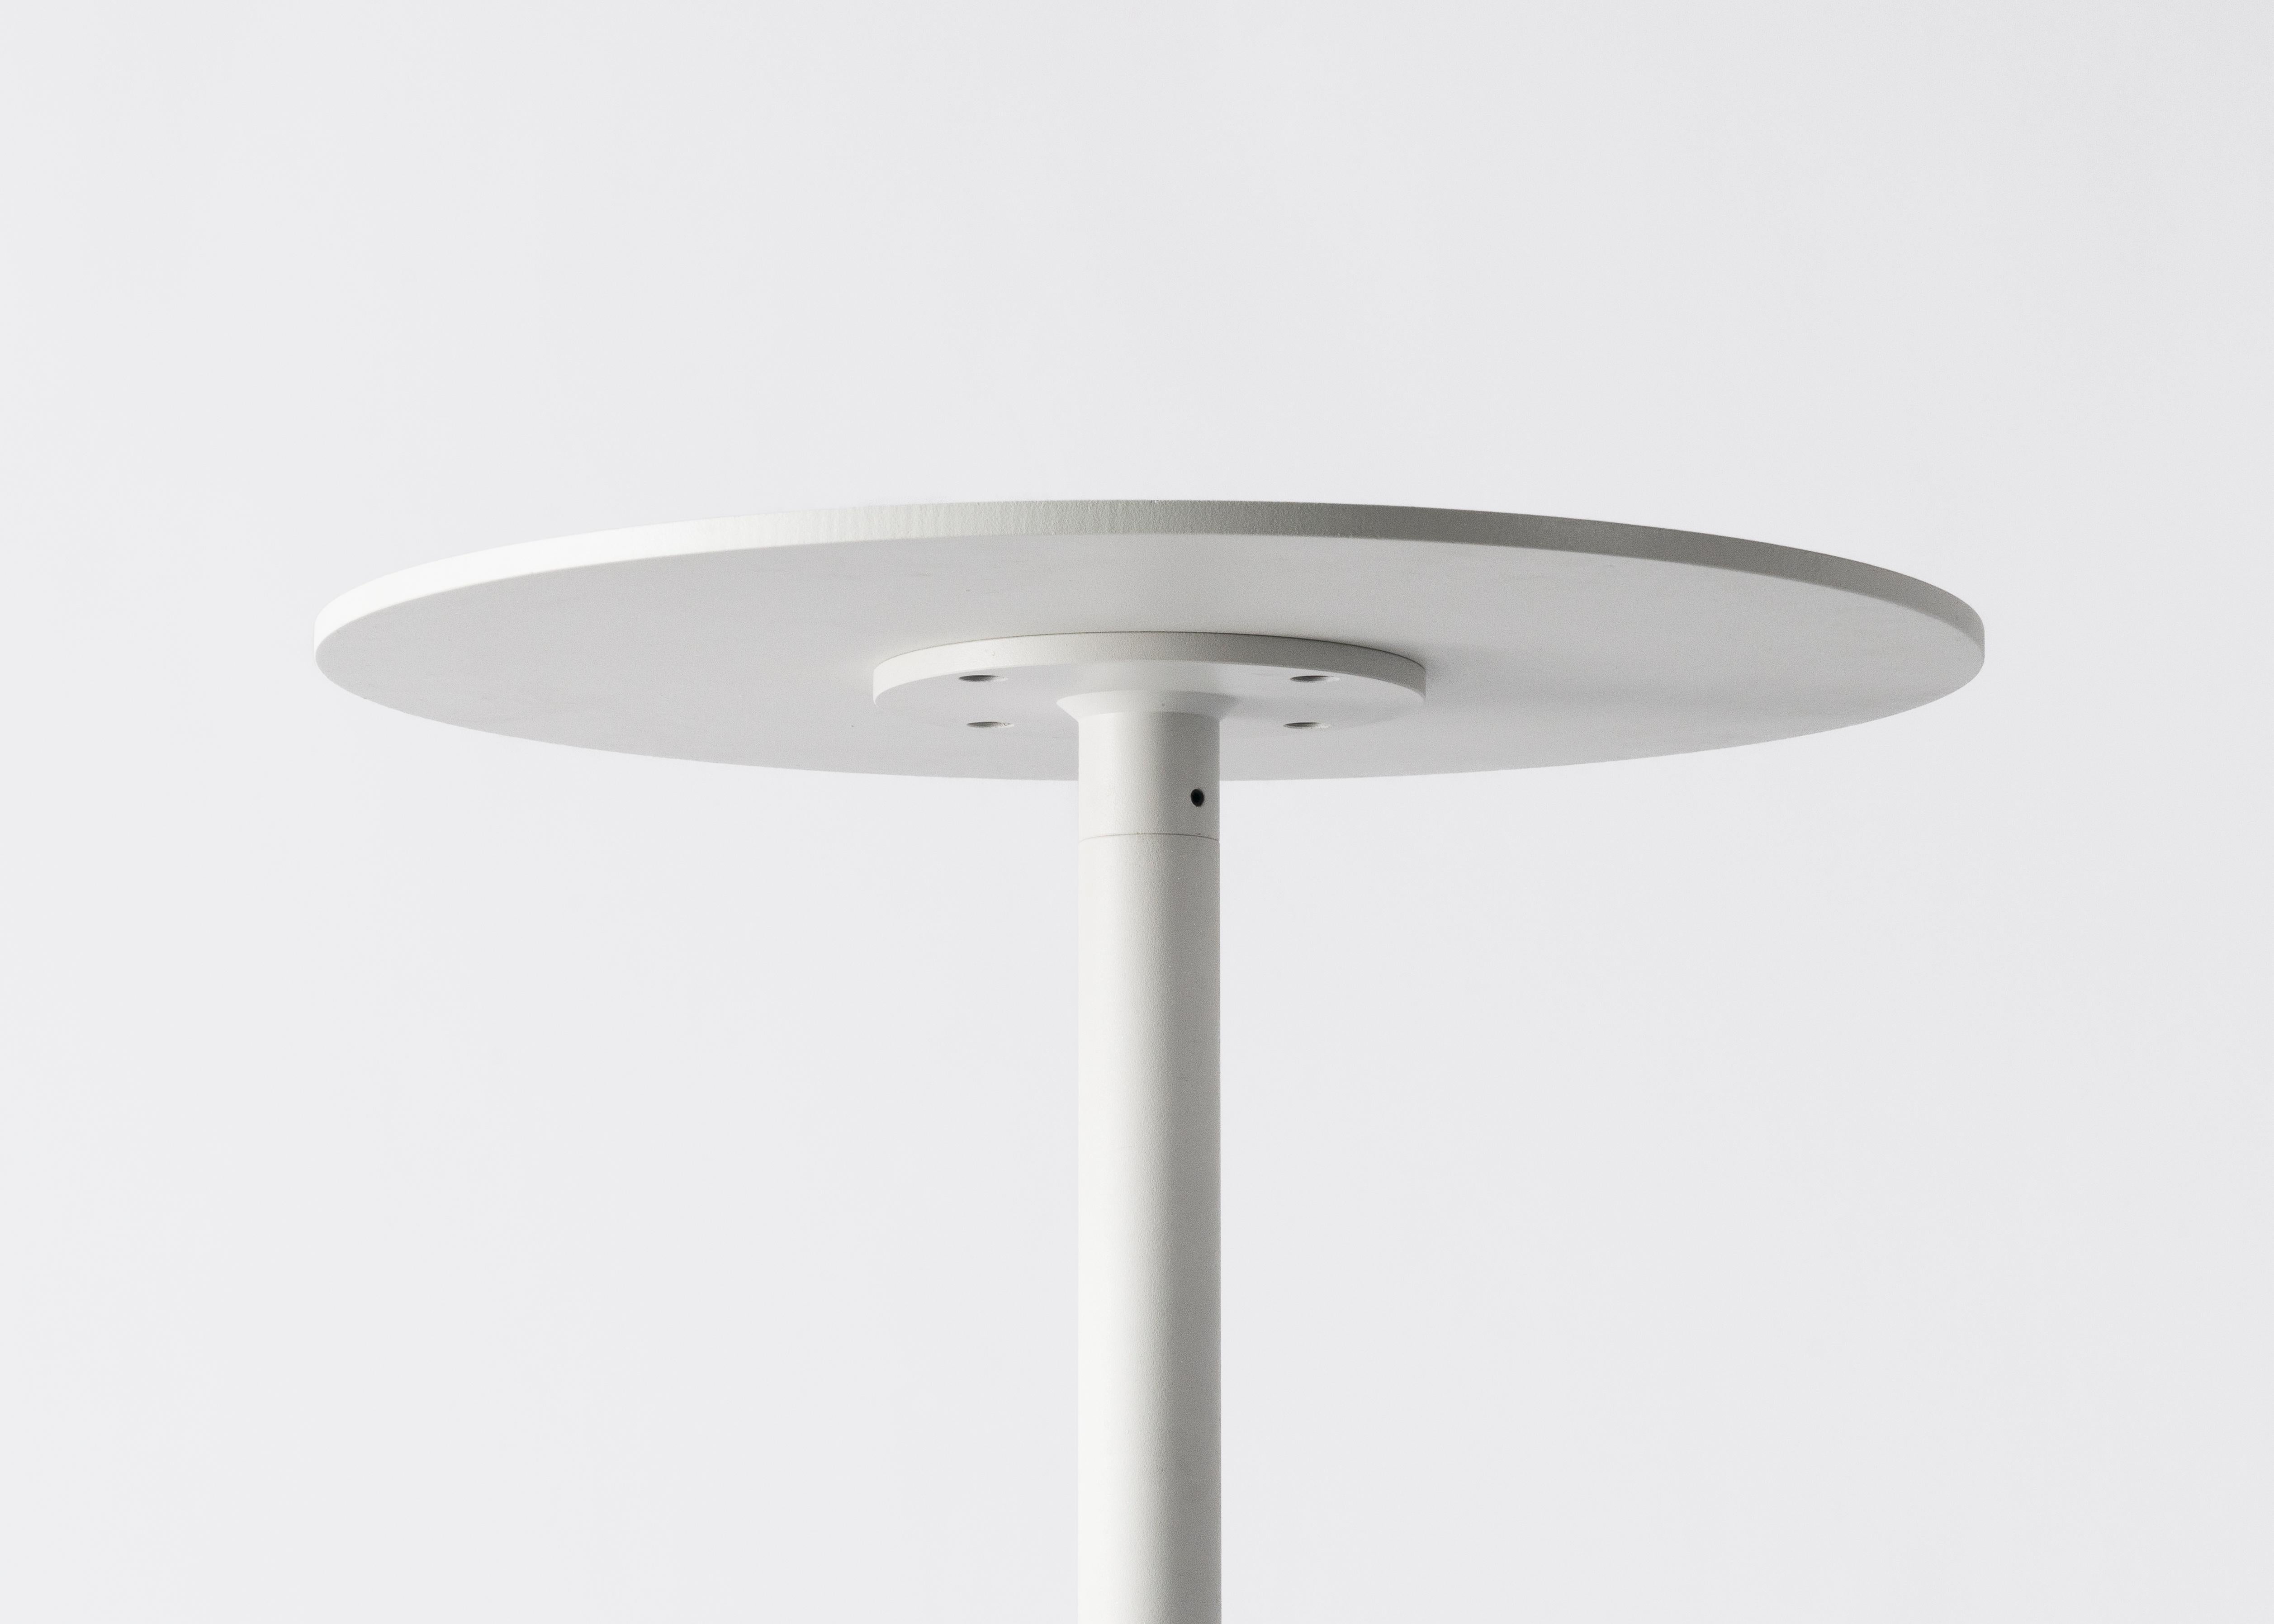 Chinese Terrazo and ALuminum Side Table, ‘Ding, ’ White, from Terrazo Collection by Bentu